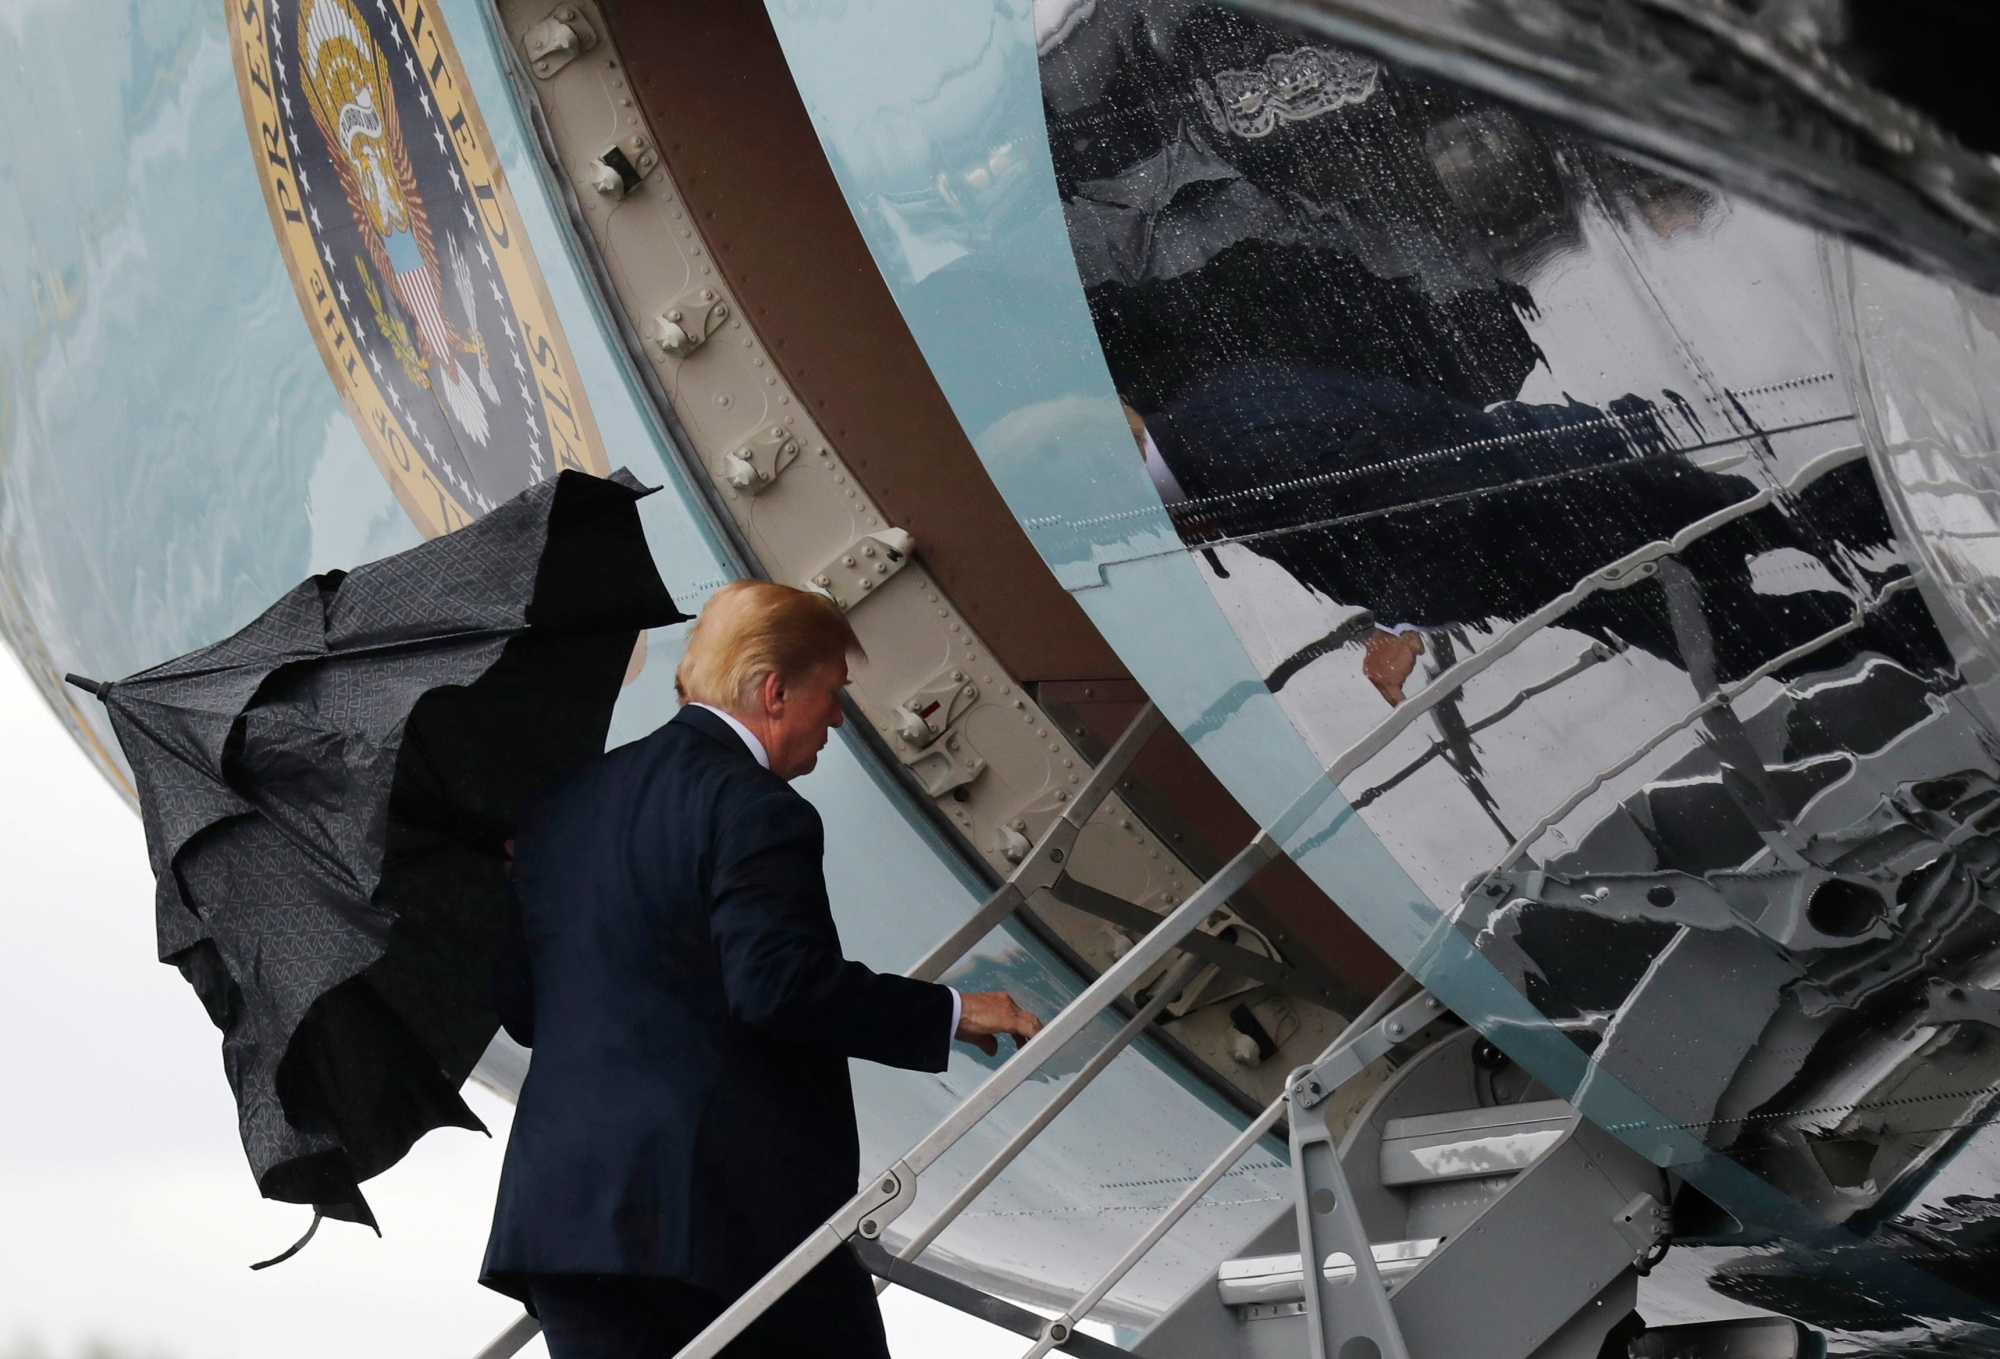 U.S. President Donald Trump boards Air Force One when departing from Glasgow, Scotland, on his way to Helsinki, Finland, Sunday, July 15, 2018 on the eve of his meeting with Russian President Vladimir Putin. (AP Photo/Pablo Martinez Monsivais) Finland Trump Putin Summit